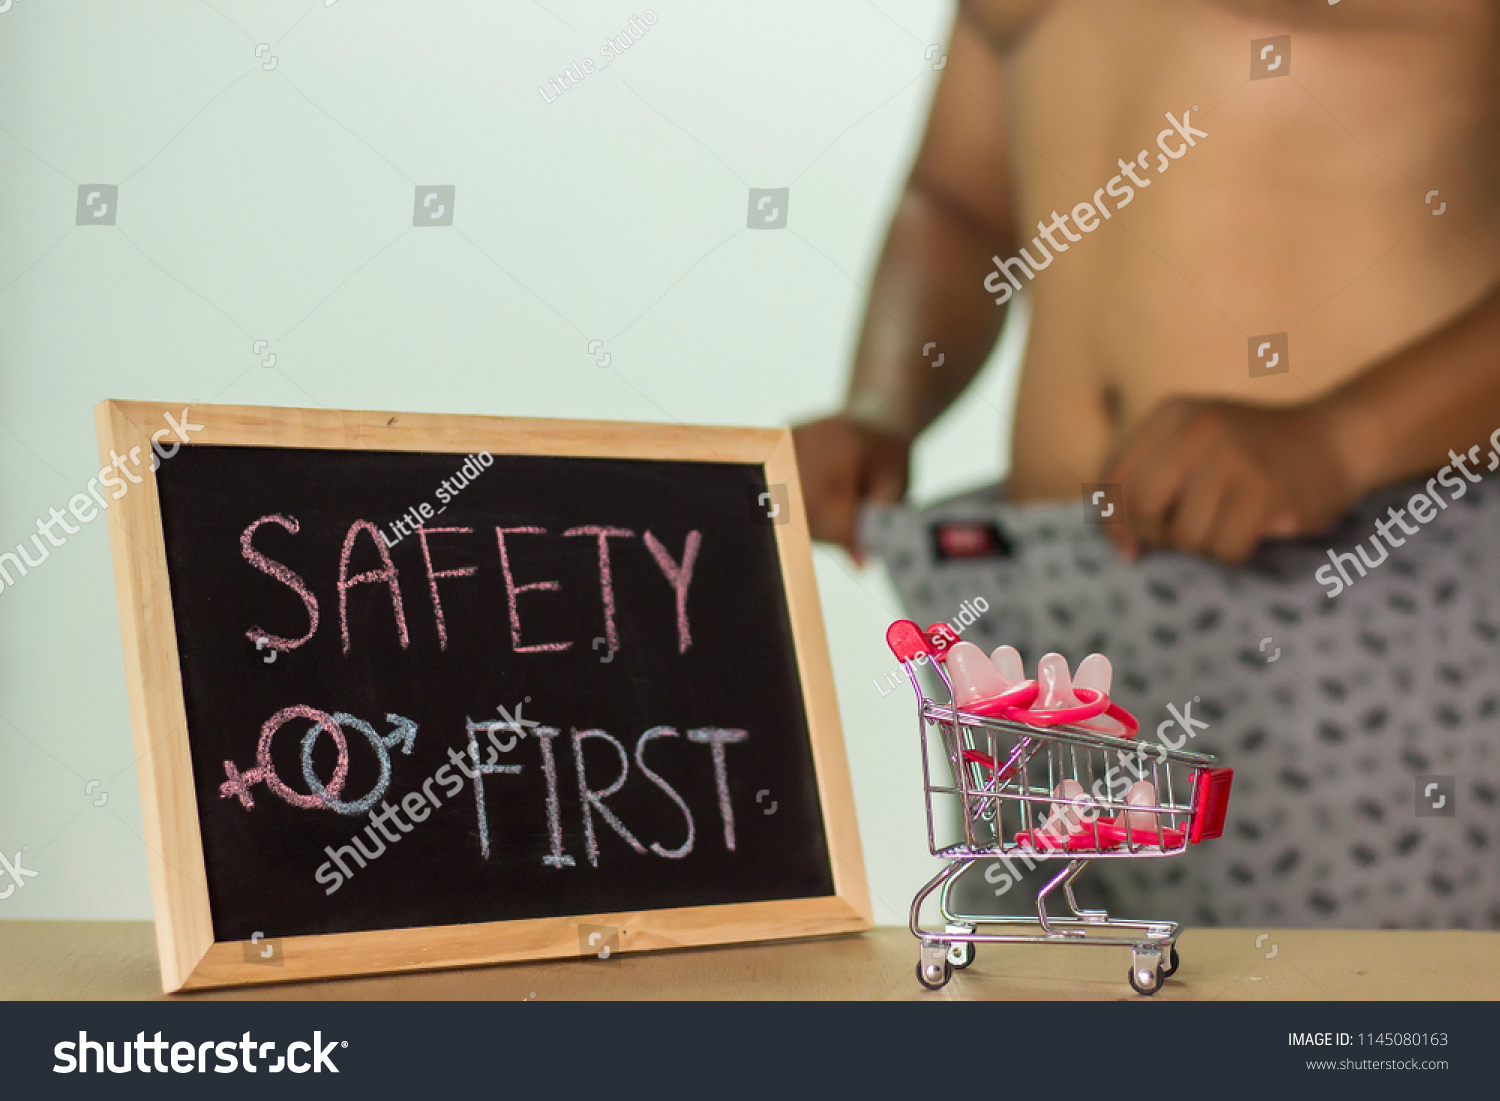 safety first, The blackboard sign reads safety first condom with trolley, male genital concept of an advertisement can be used, About sexuality and the prevention of sexually transmitted diseases. #1145080163